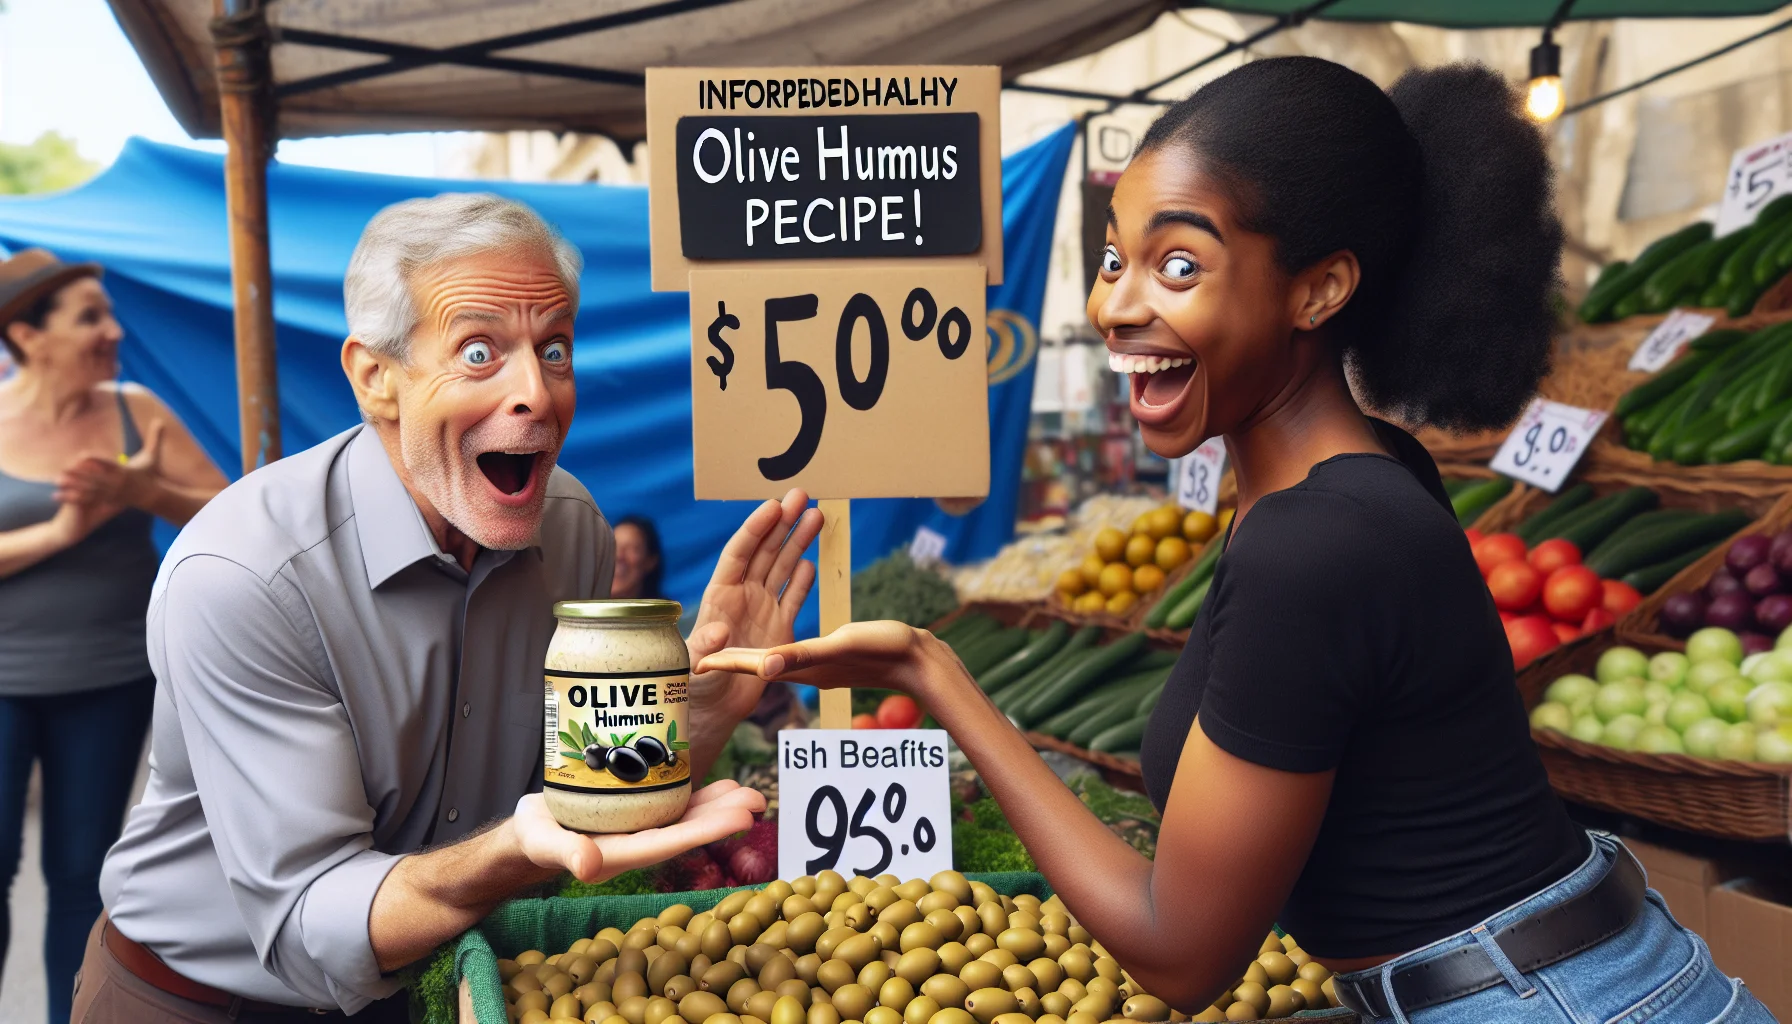 Create a humorous and realistic image that portrays an inexpensive and healthy olive hummus recipe. Imagine a scene where a middle-aged Caucasian man and a young Black woman are bargaining at a lively farmer's market. The man is wide-eyed with surprise, holding a large, fresh olive hummus jar in one hand, showcasing the label to the camera. The woman, the vendor, is grinning broadly, pointing at the price tag that displays a ridiculously low price. The signs around the stall proudly proclaim the health benefits of the olive hummus.